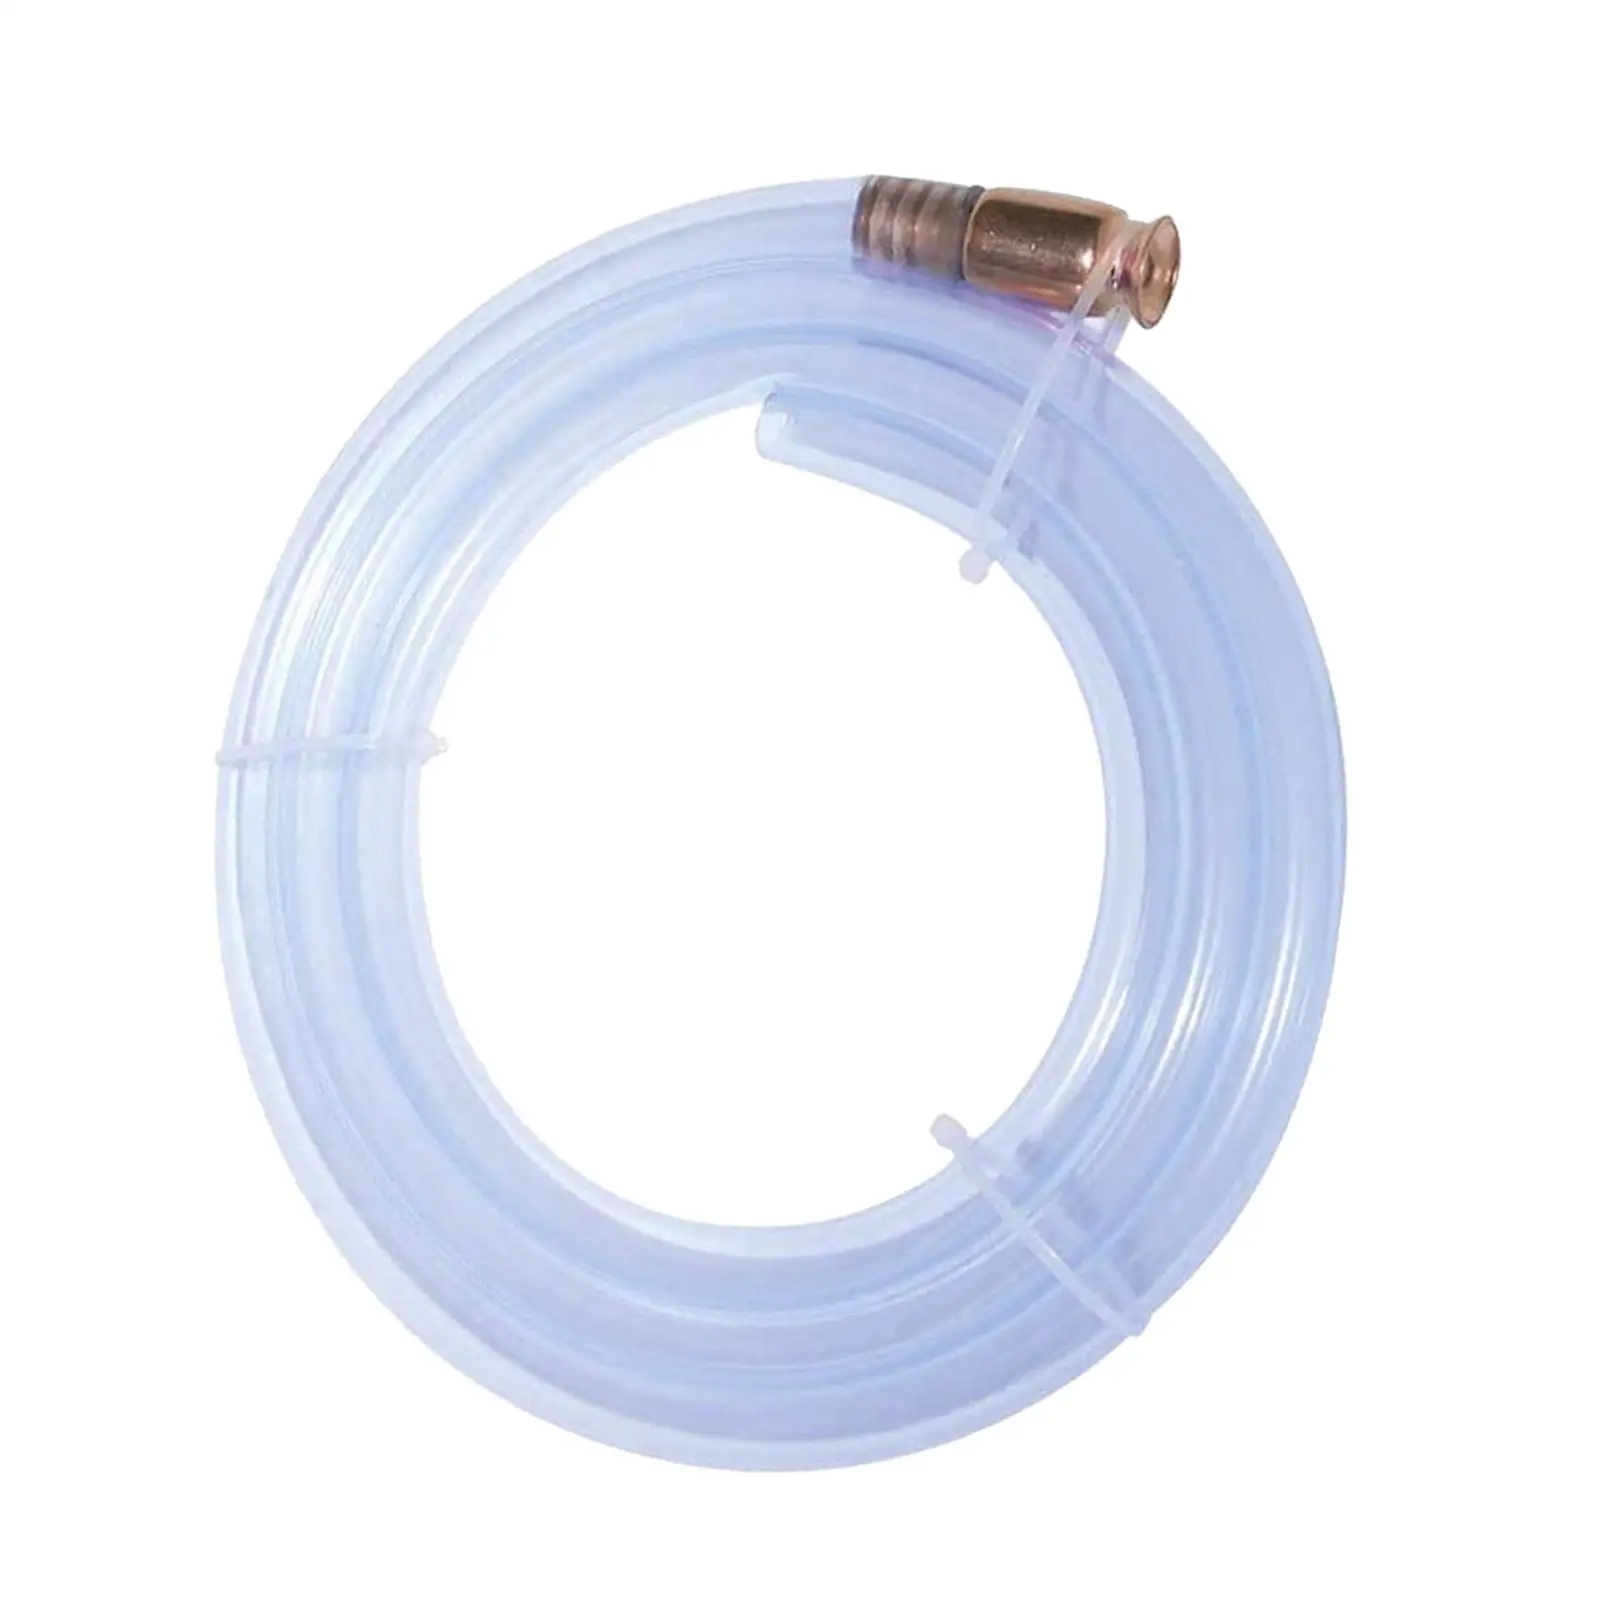 Transparent Siphon Hose 3/4 inch 118inch for Fuel Transfering PVC Tube